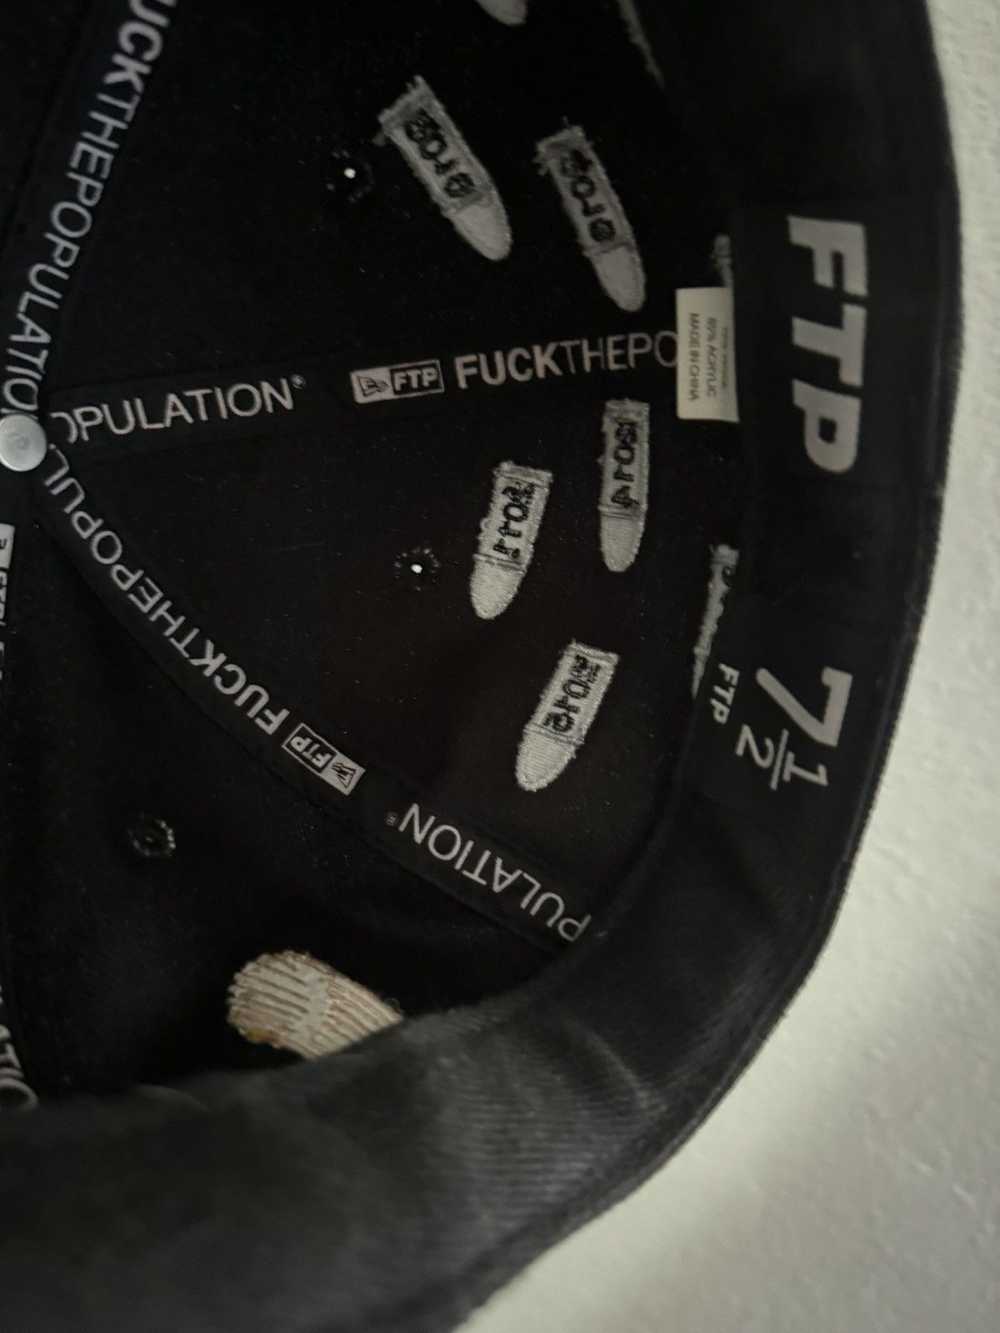 Fuck The Population FTP champions fitted hat - image 3